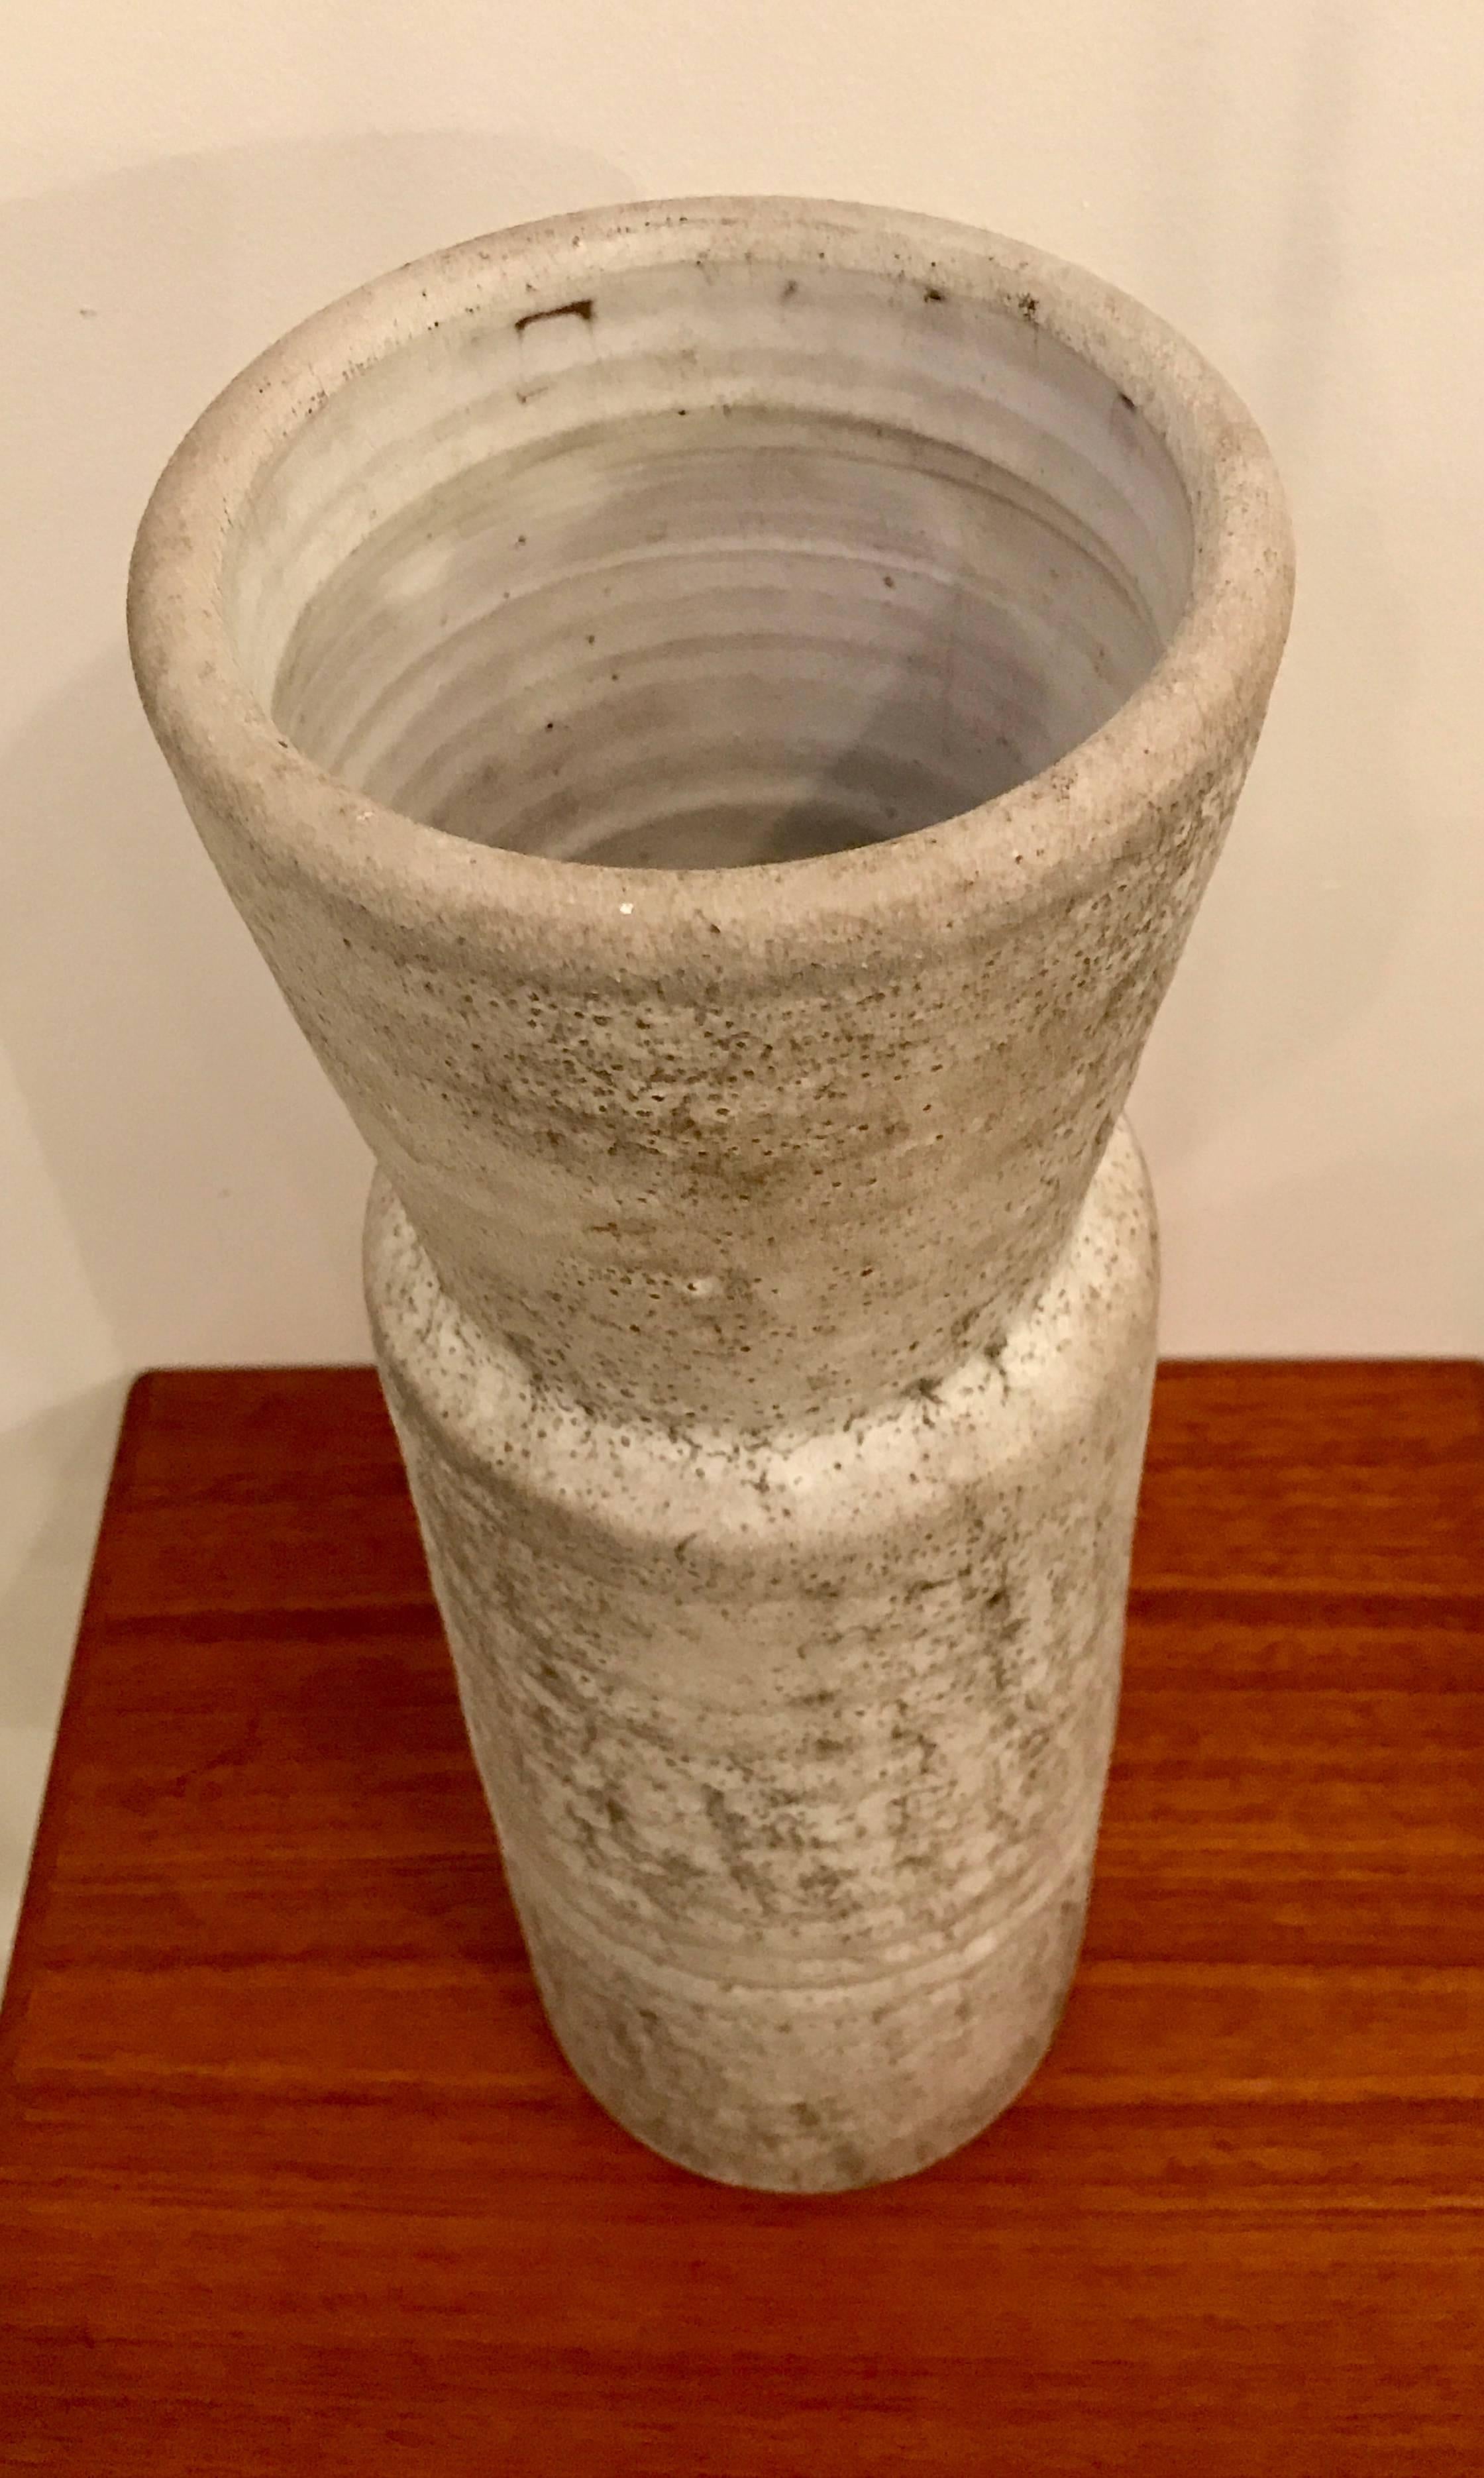 Impressive fired stoneware vessel by Mobach, Holland. The Mobach family has been producing kiln fired ceramics for over five generations. This piece is substantial in size, a beautiful sand colored with a semi matte finish.